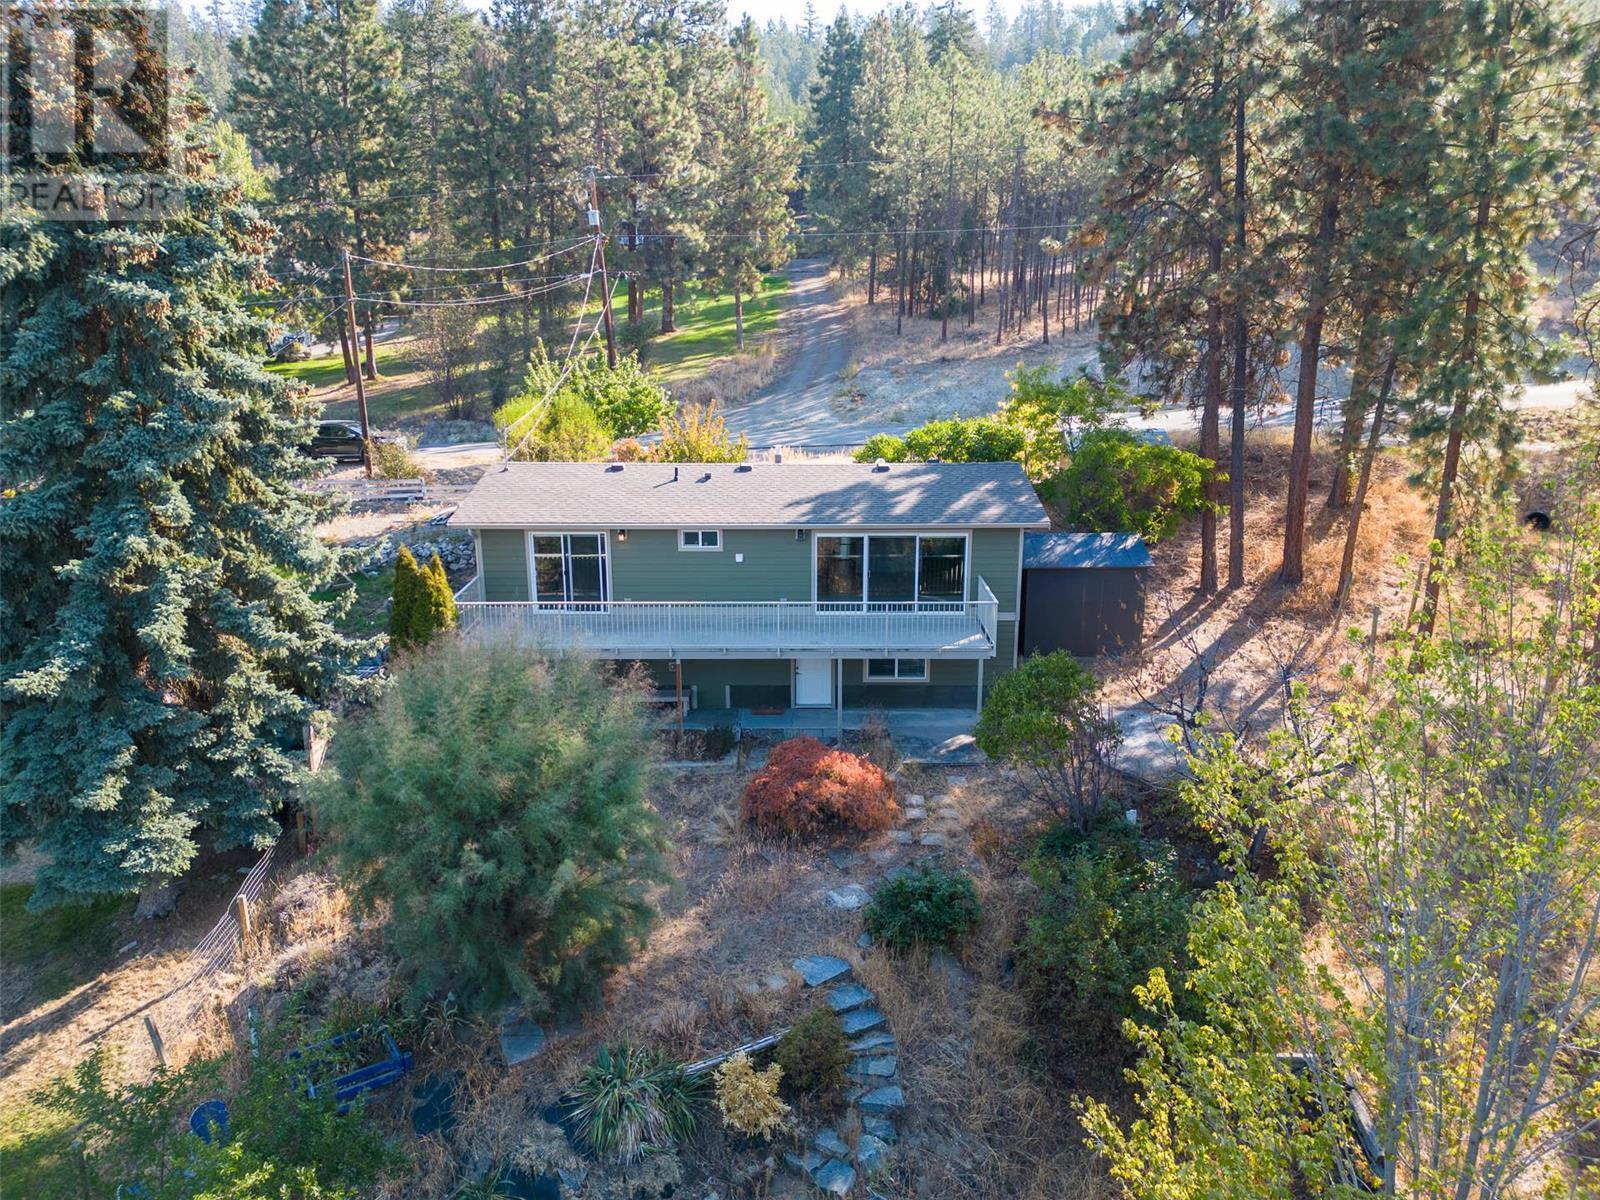 10914 Hare Road Lake Country